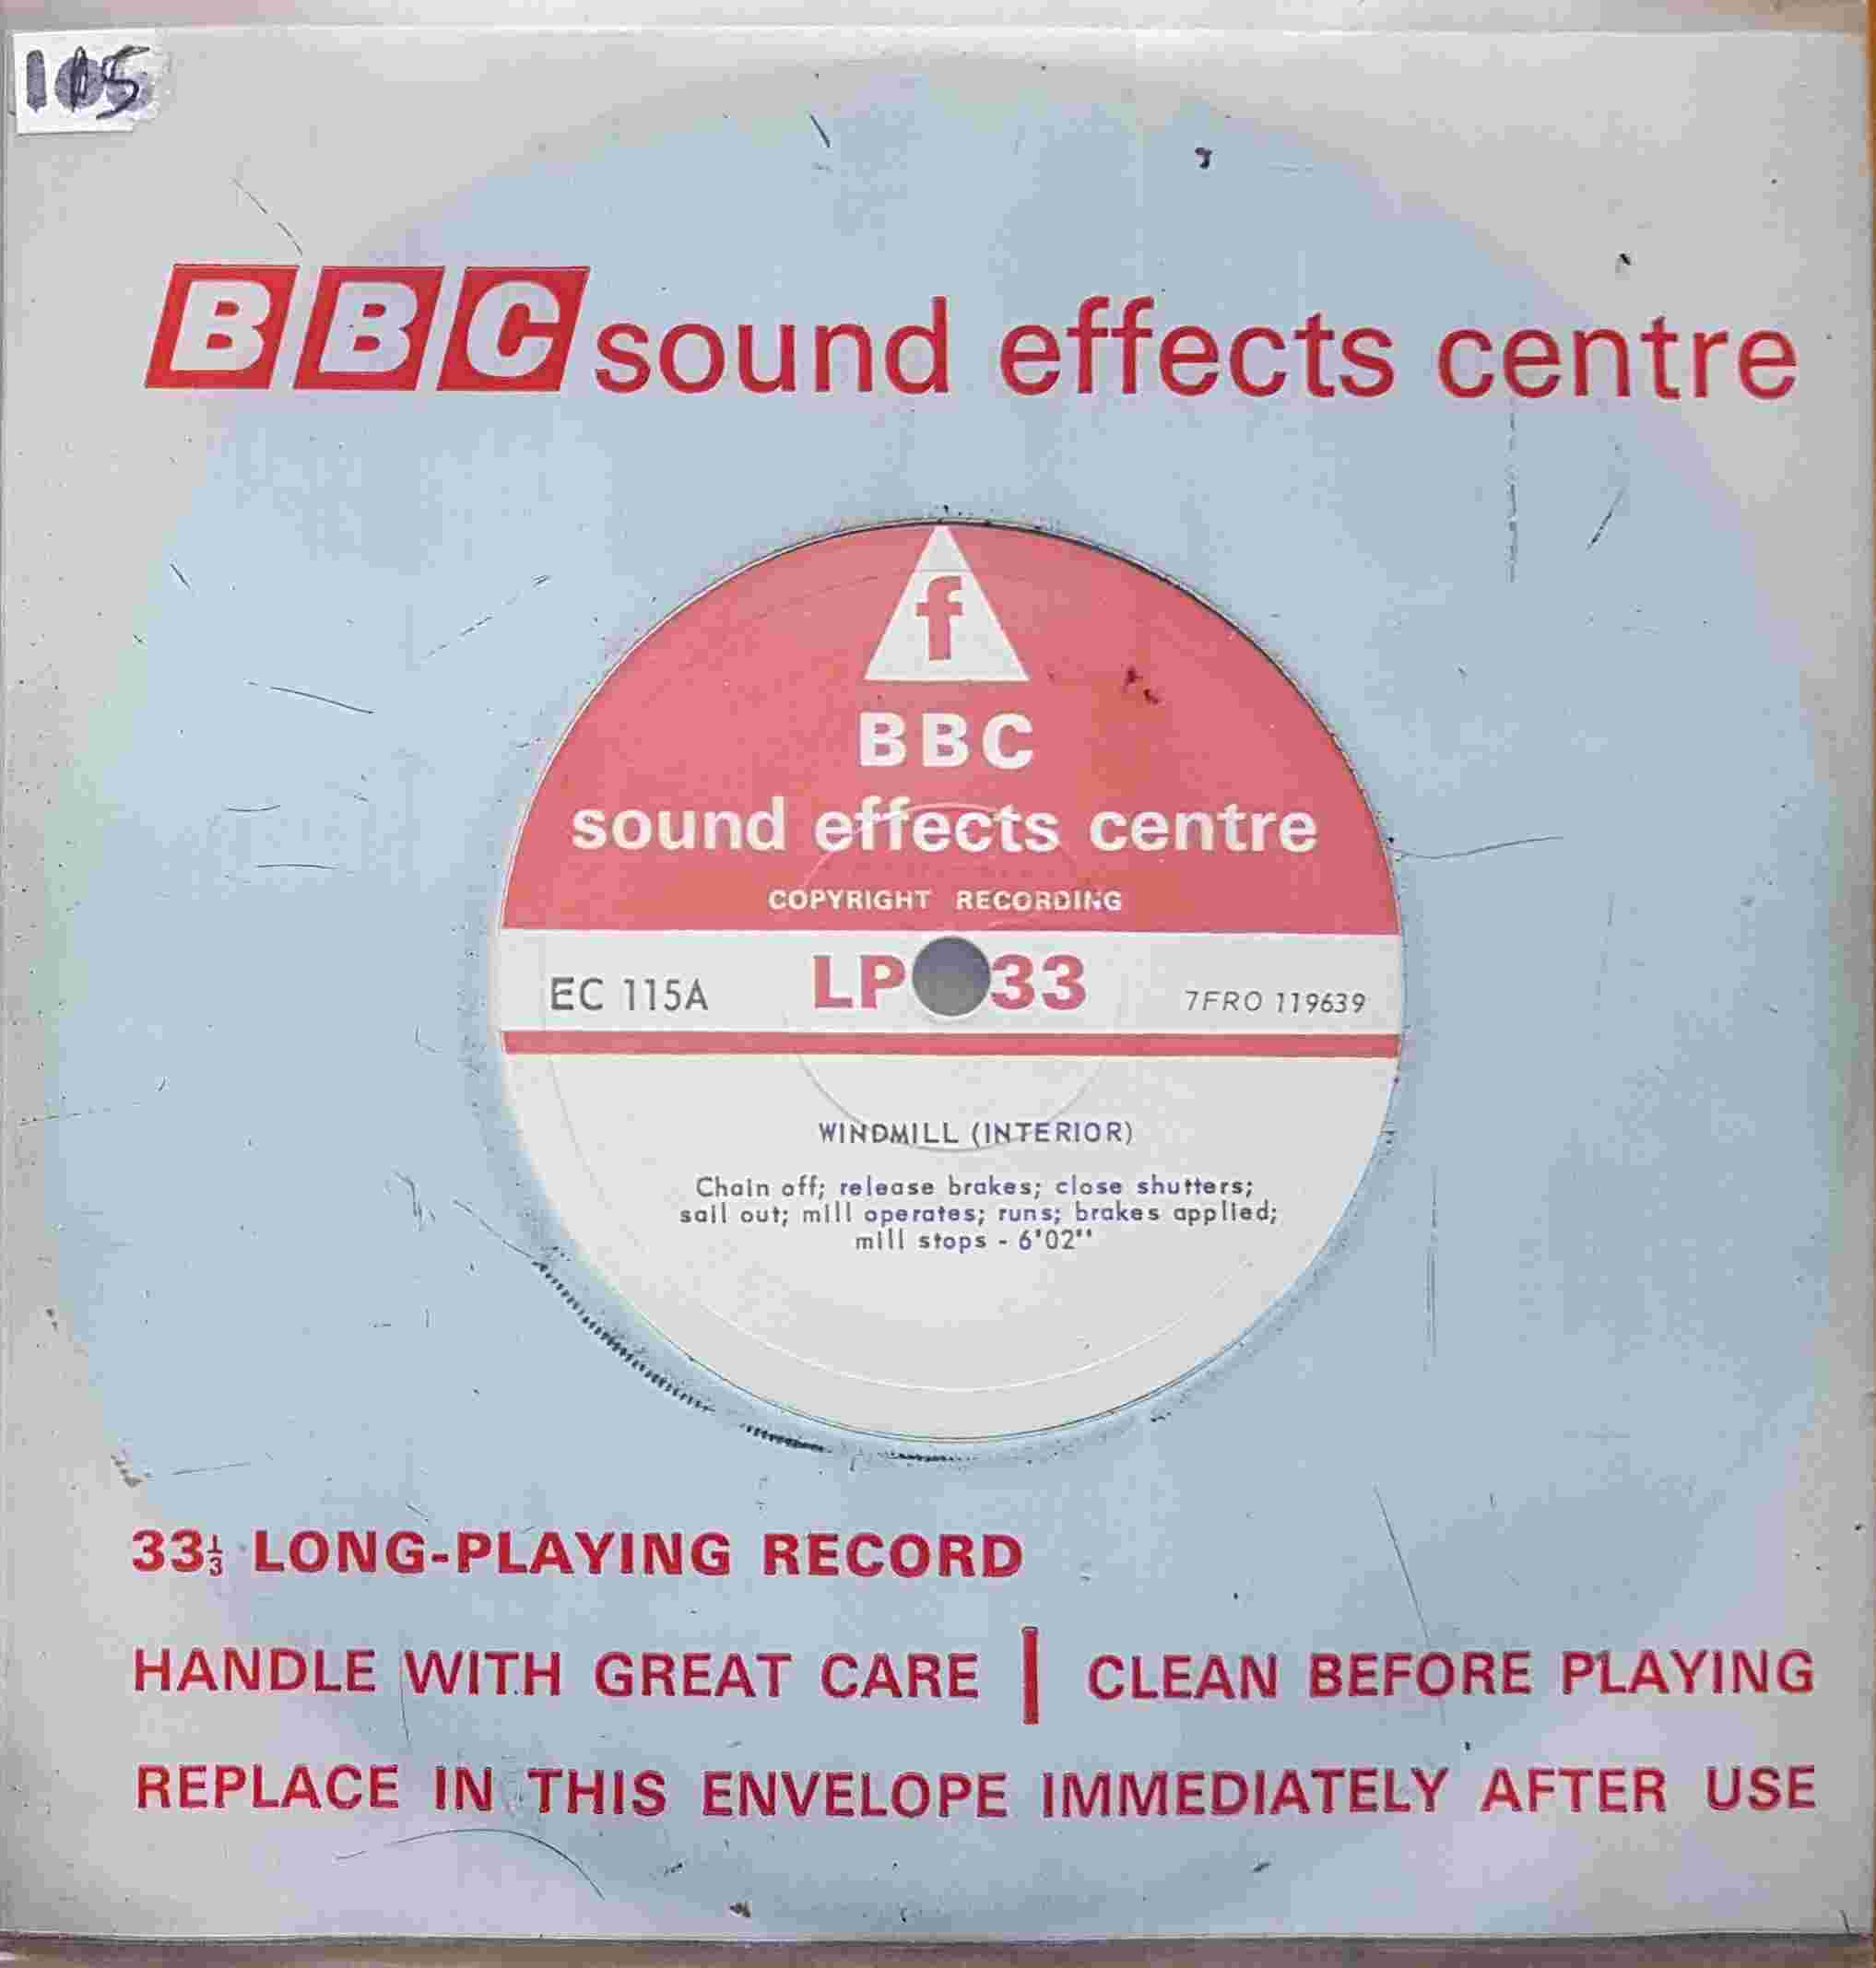 Picture of EC 115A Windmill by artist Not registered from the BBC records and Tapes library